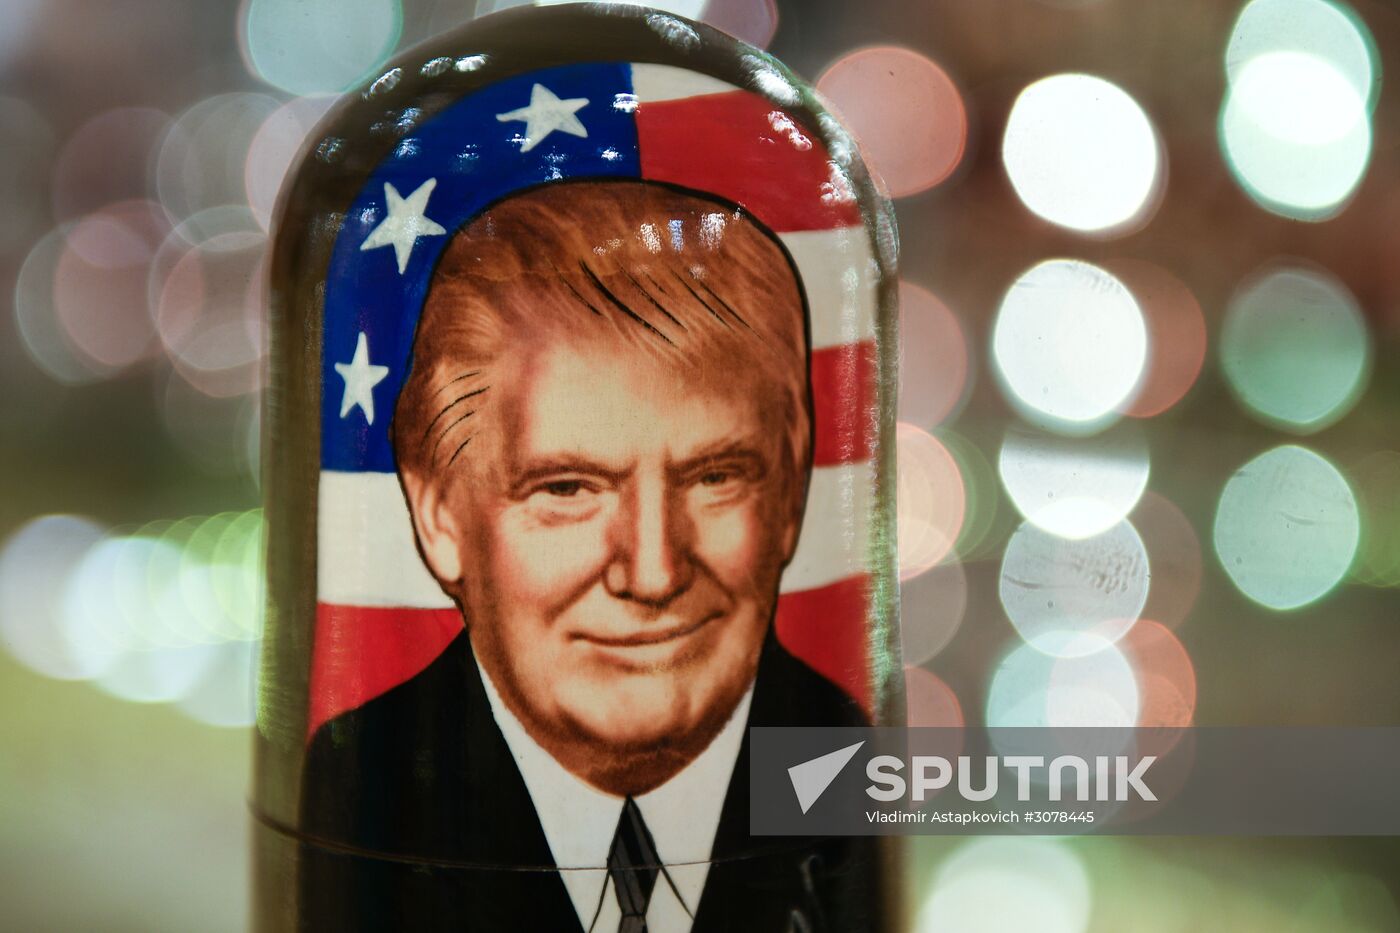 Trump-face matryoshka dolls are sold in Moscow